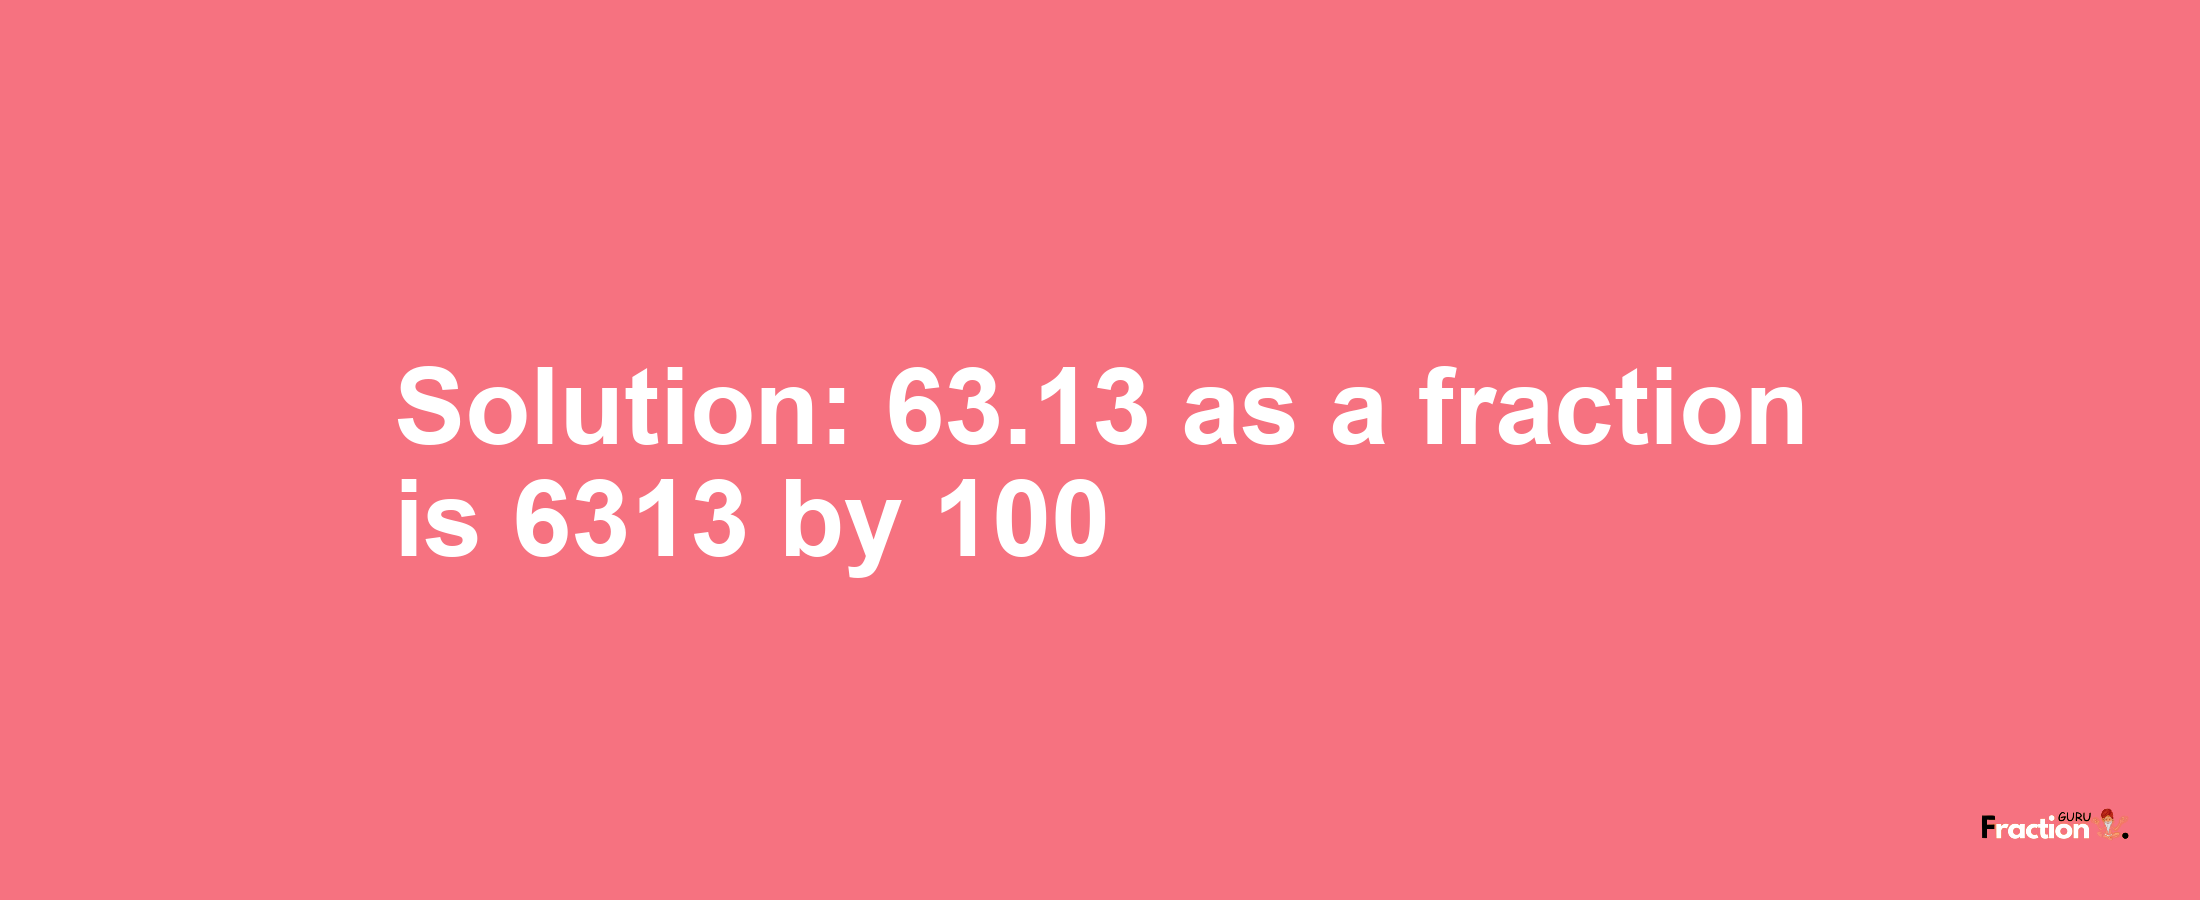 Solution:63.13 as a fraction is 6313/100